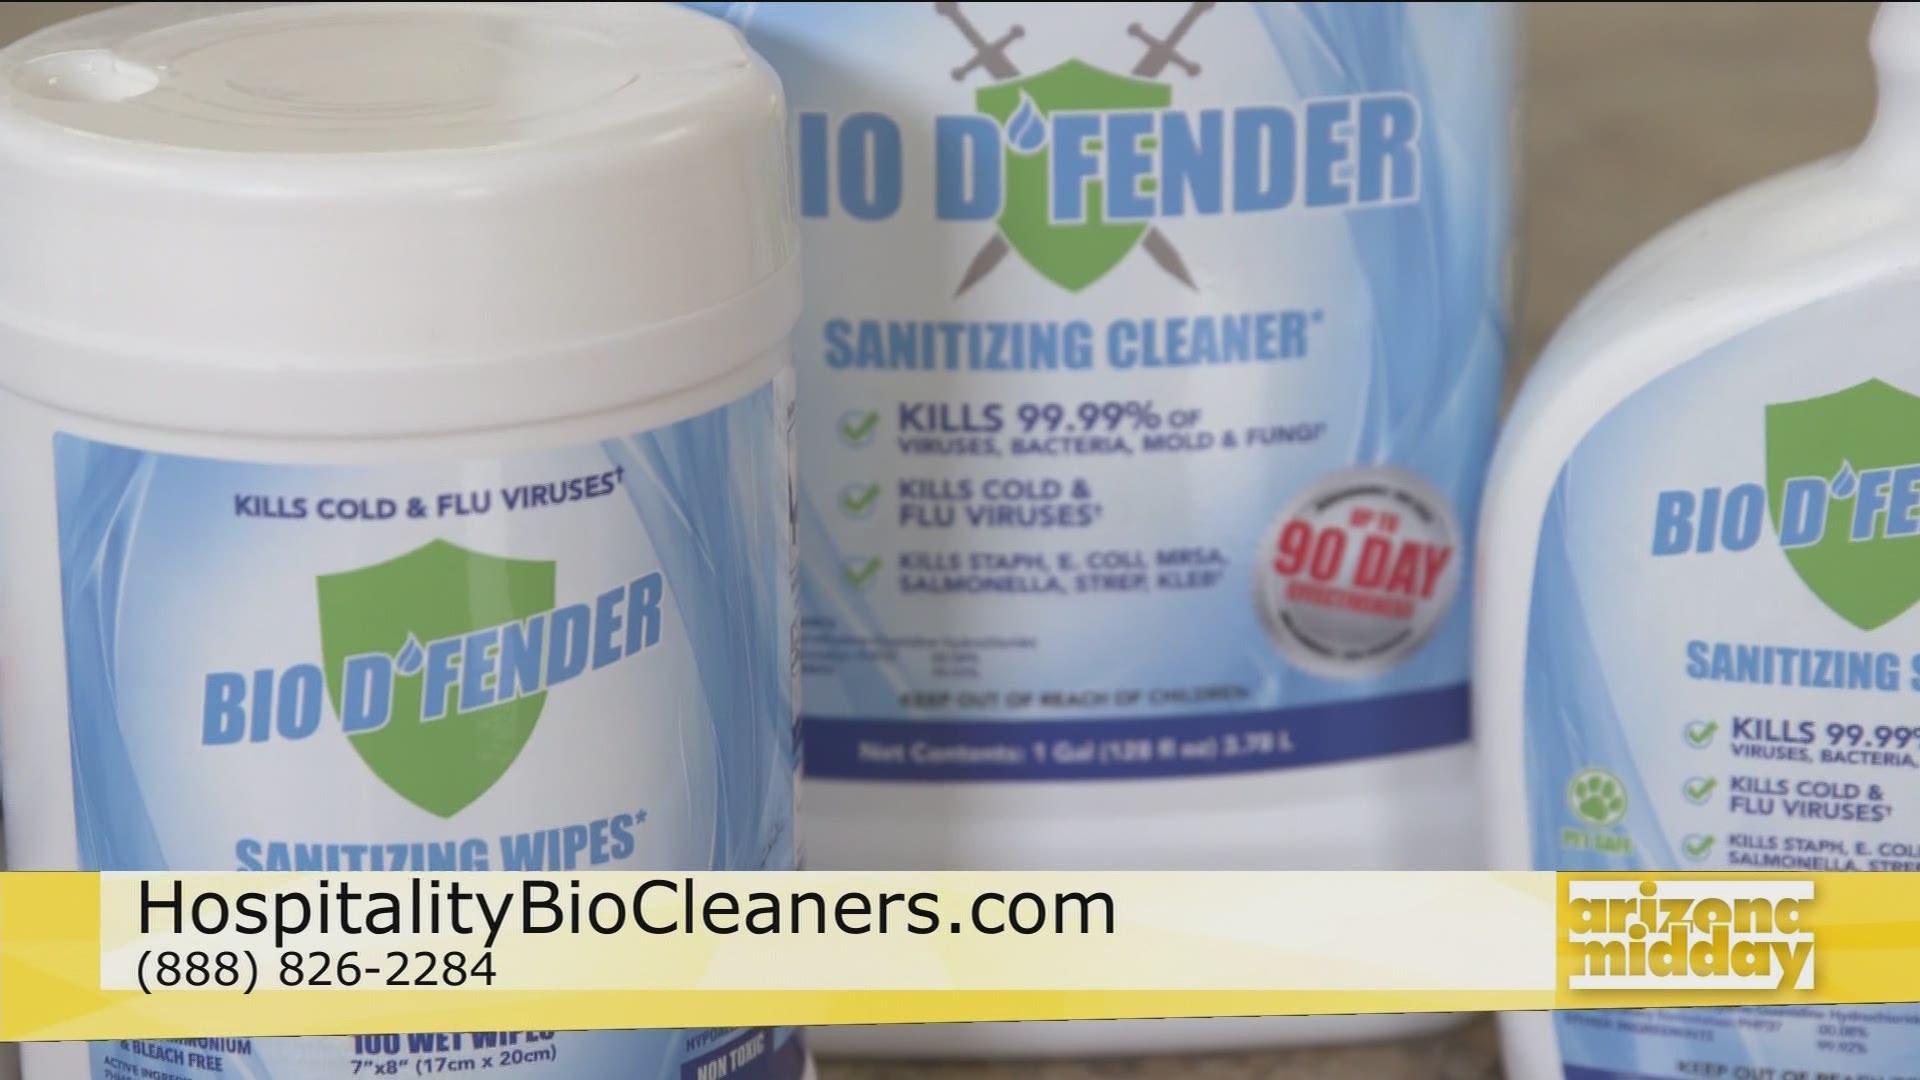 Tom James, Vice President of Hospitality Bio Cleaners, shows us how their cleaning products work plus how to start cleaning your home or business today